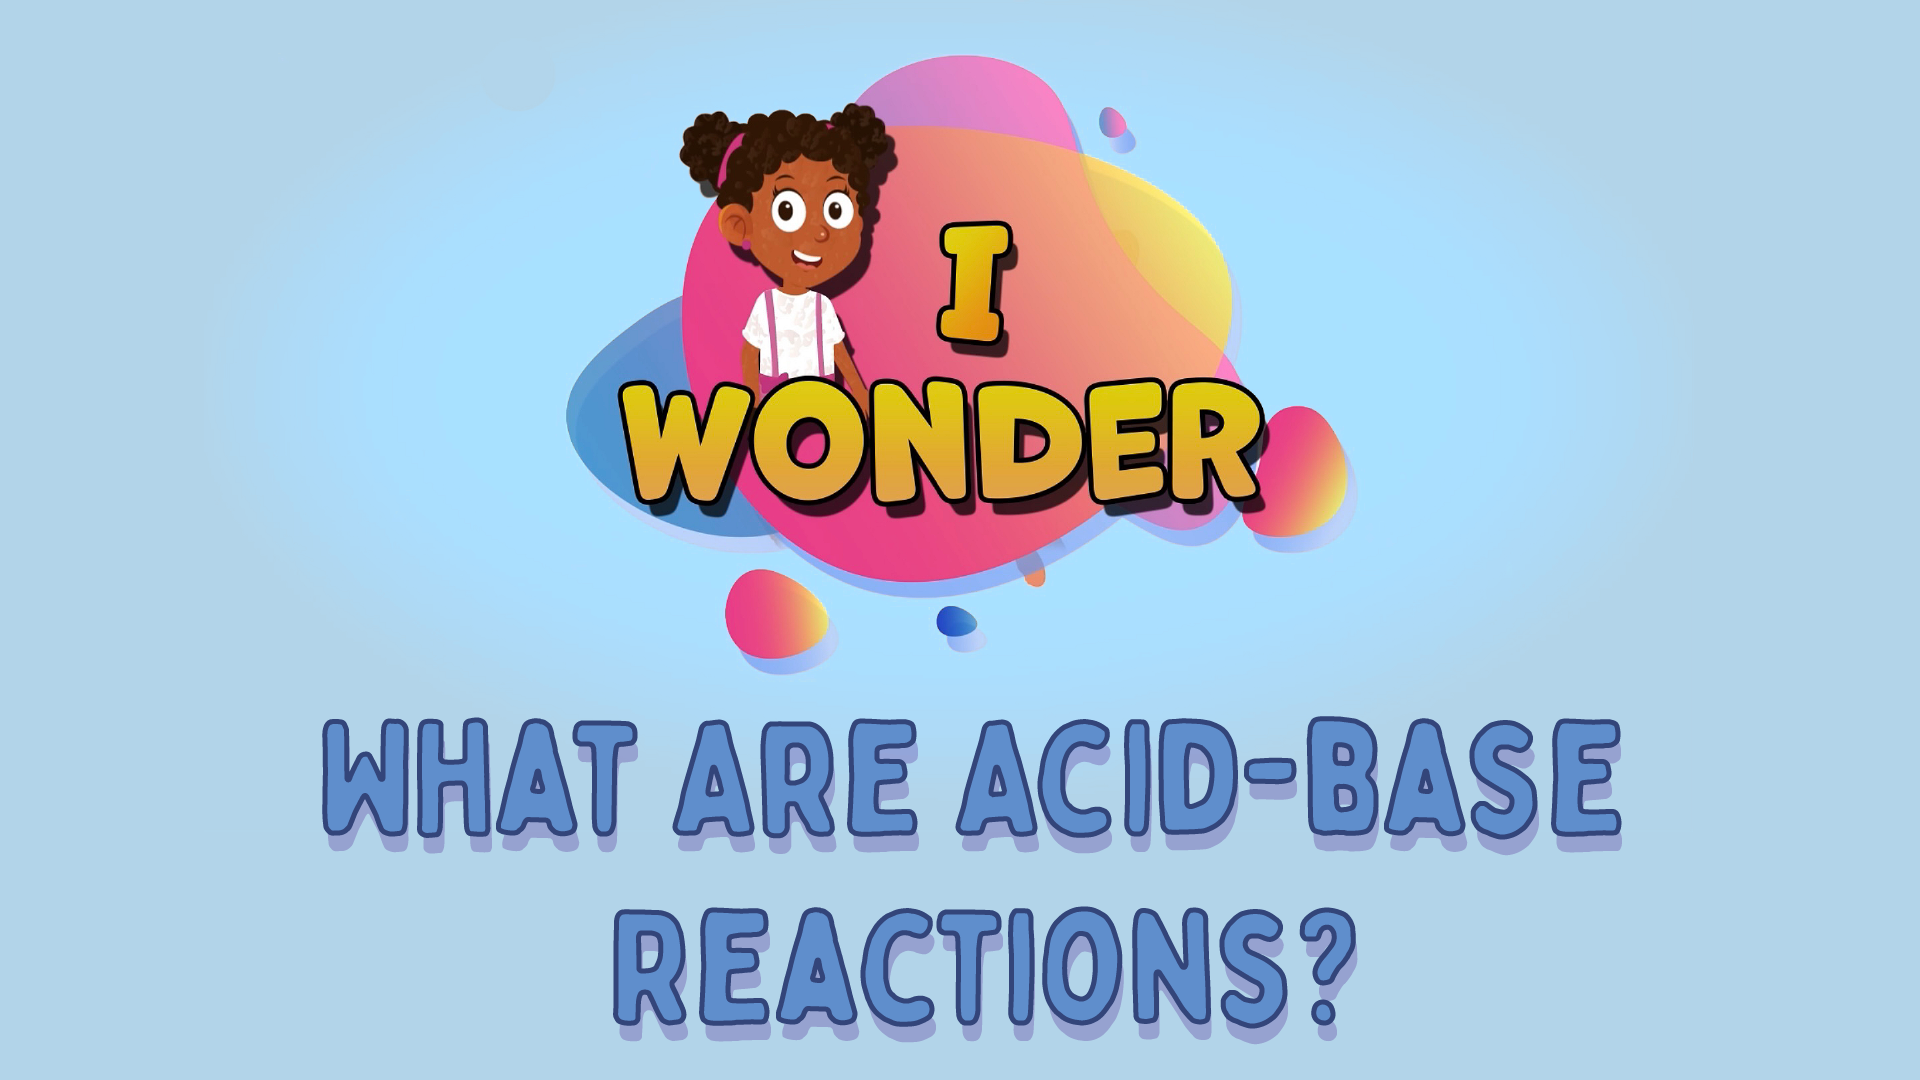 What Are Acid-base Reactions?